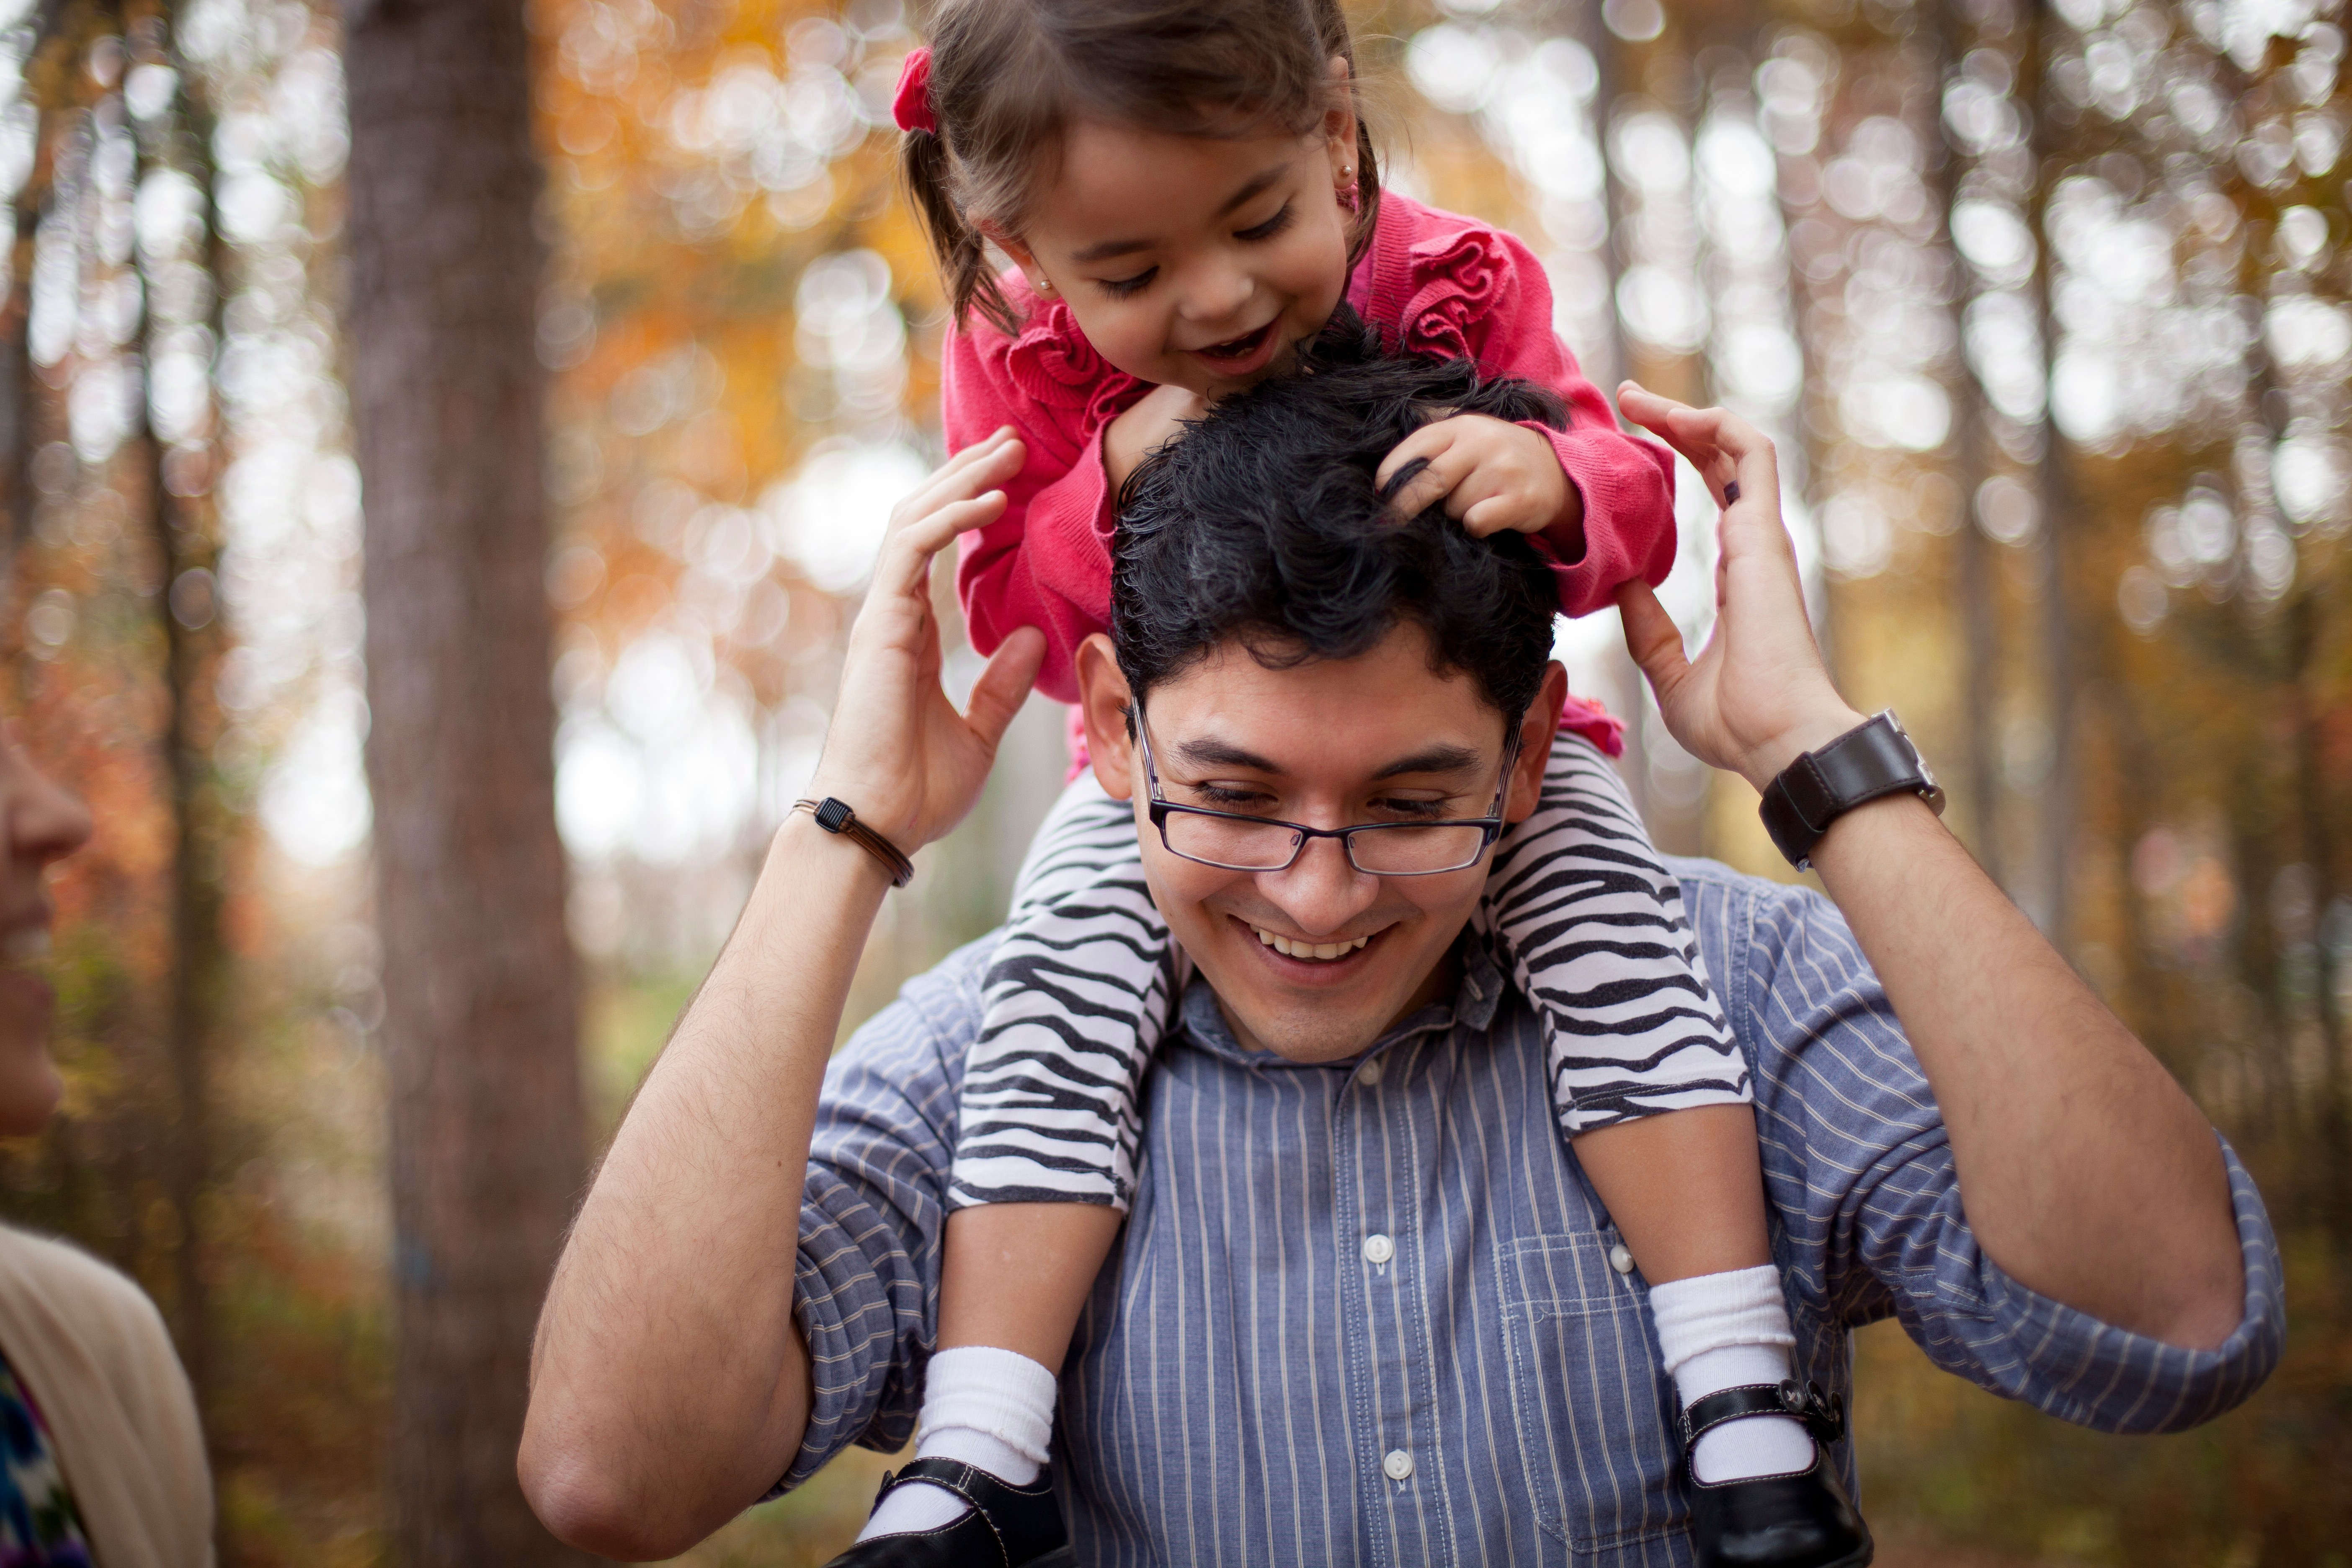 A toddler girl sits on her father’s shoulders and smiles.